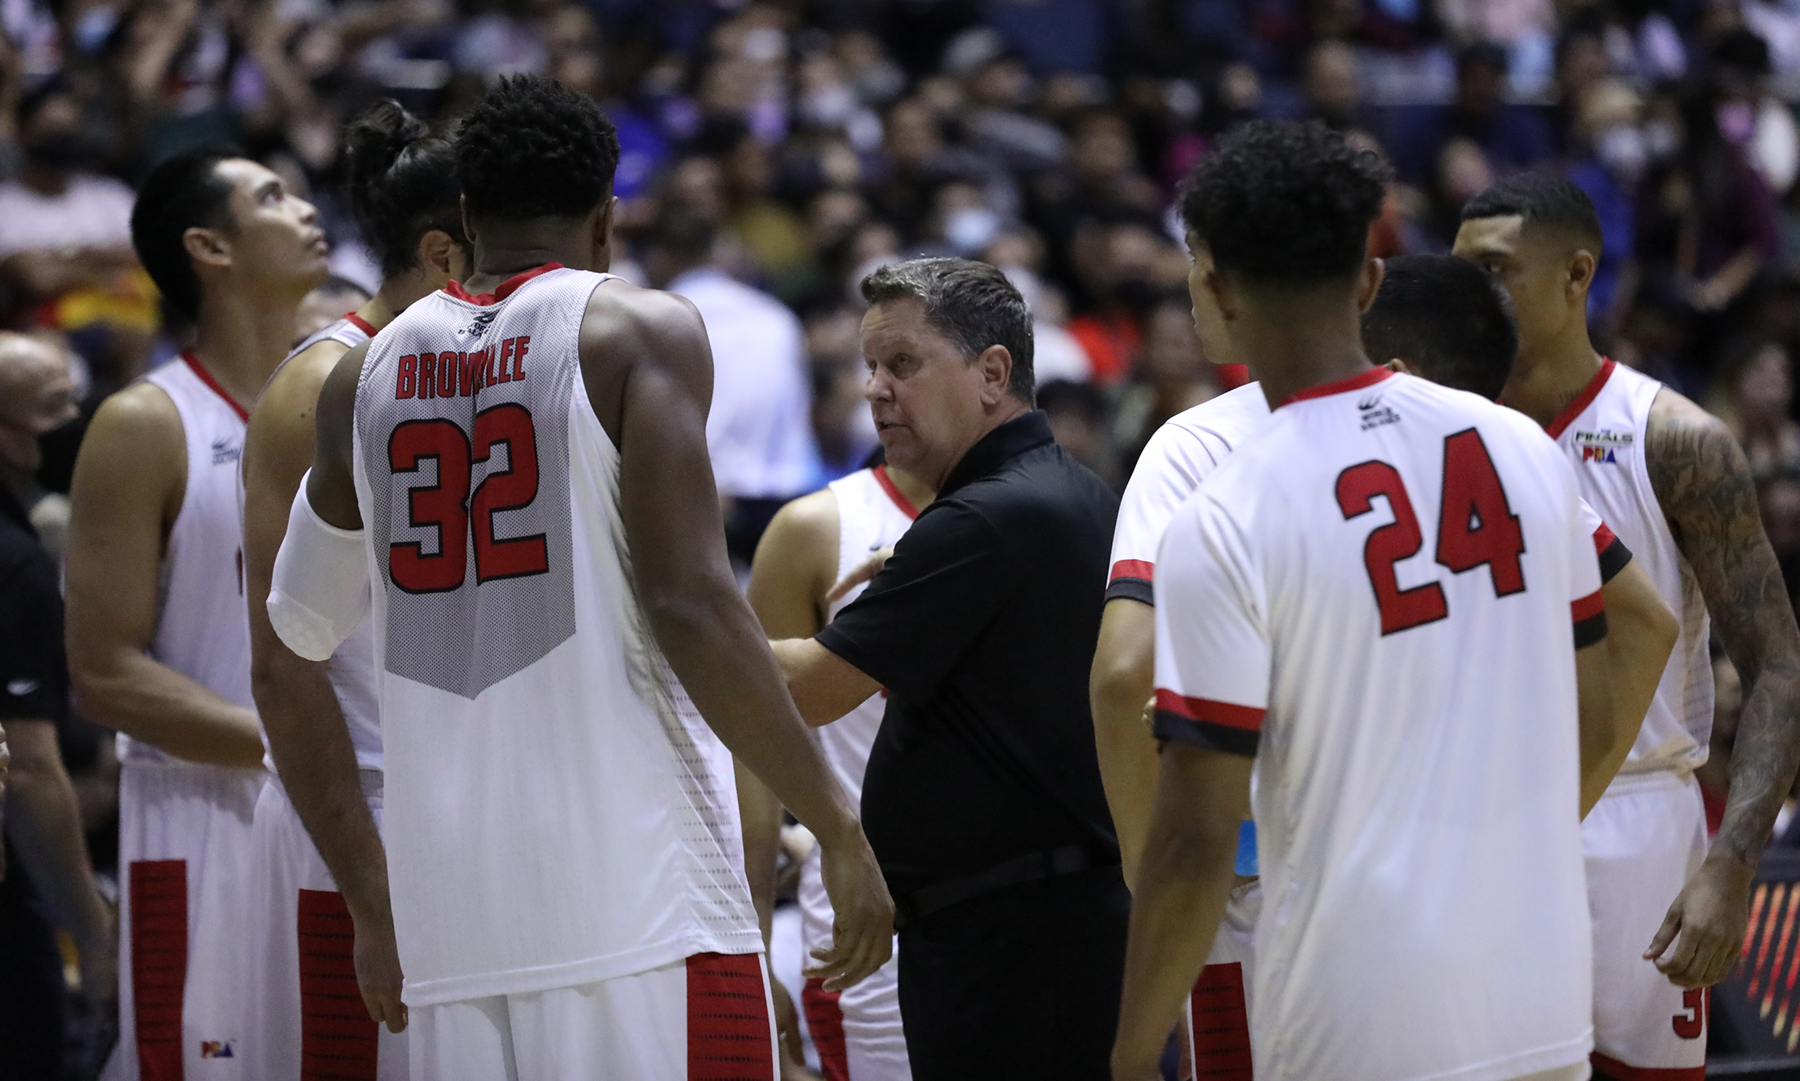 Ginebra coach Tim Cone with the Gin Kings during Game 2 of the PBA Finals. –PBA IMAGES